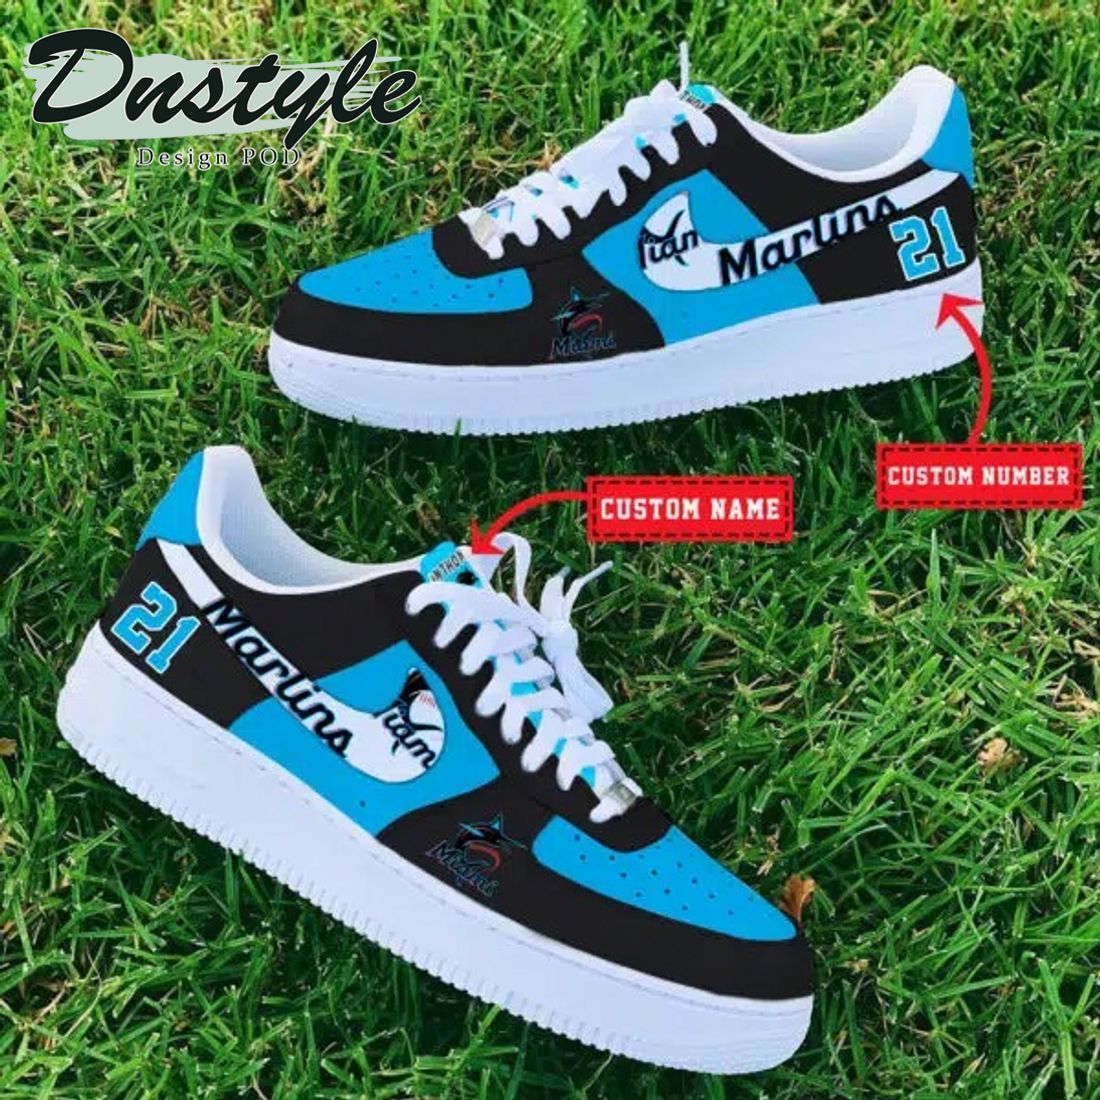 MLB Miami Marlins Personalized Name Number Nike Air Force 1 Sneakers